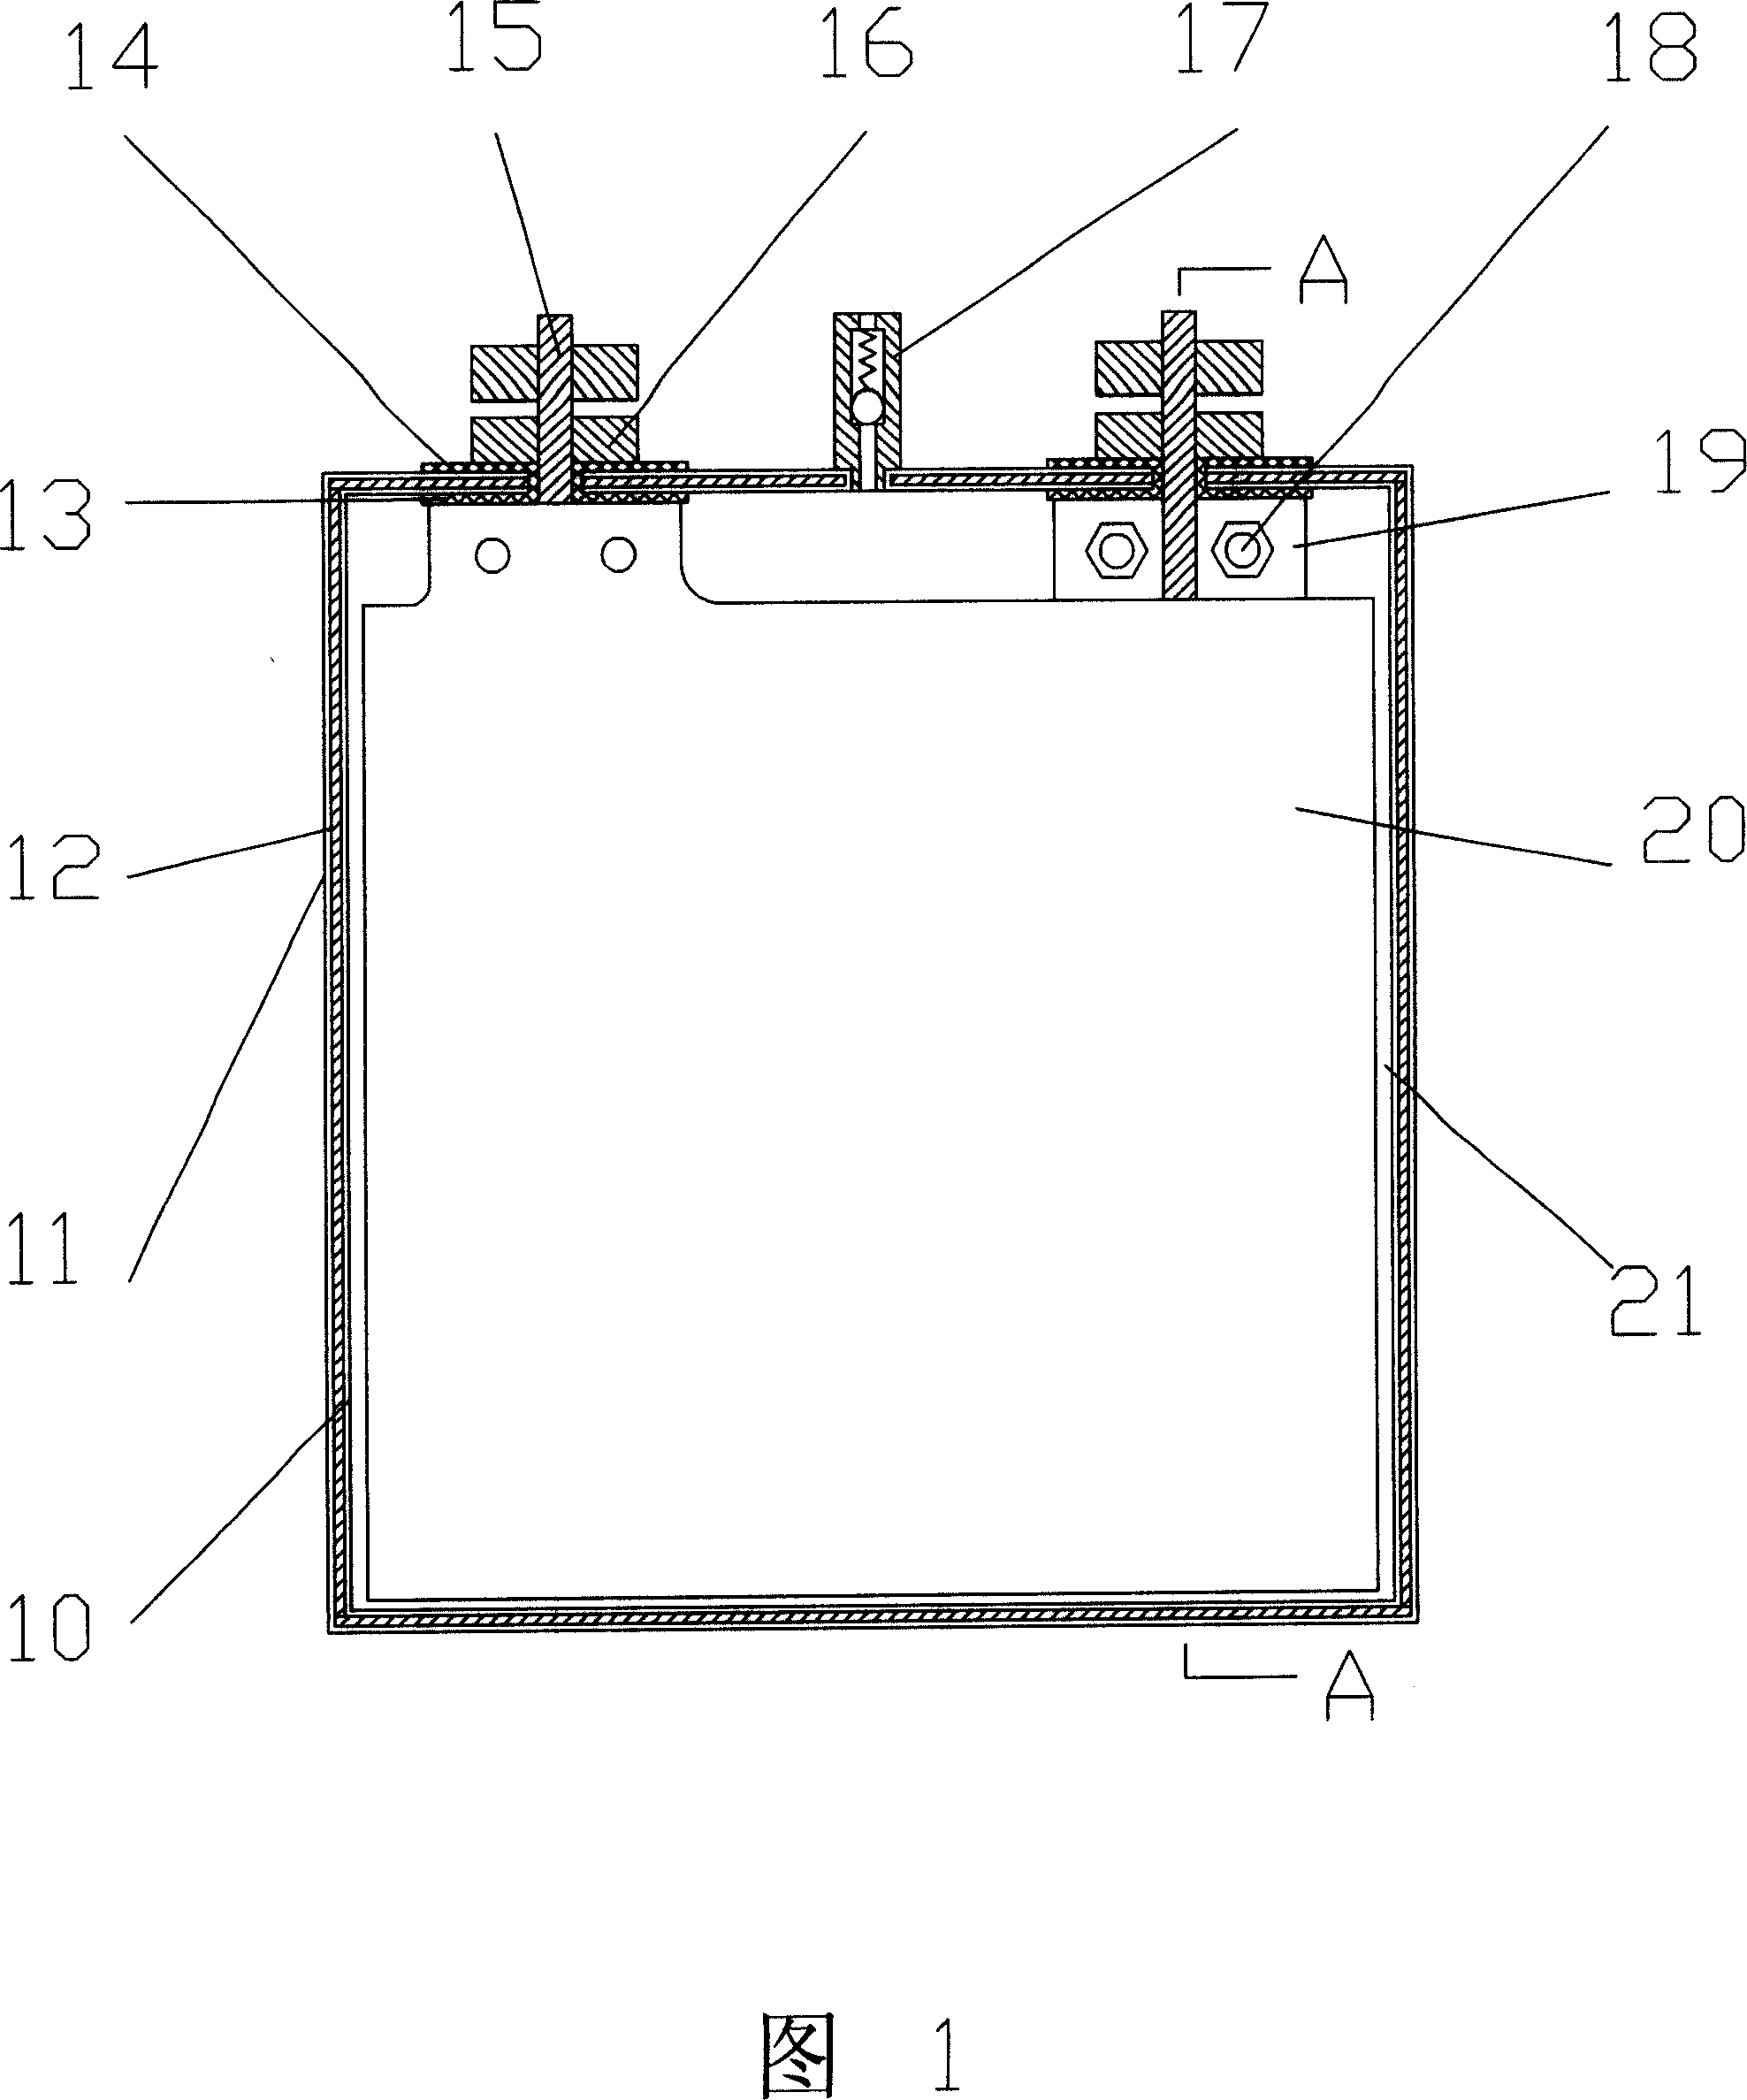 Colloidal electrolyte lithium ion electrokinetic cell for electric vehicle